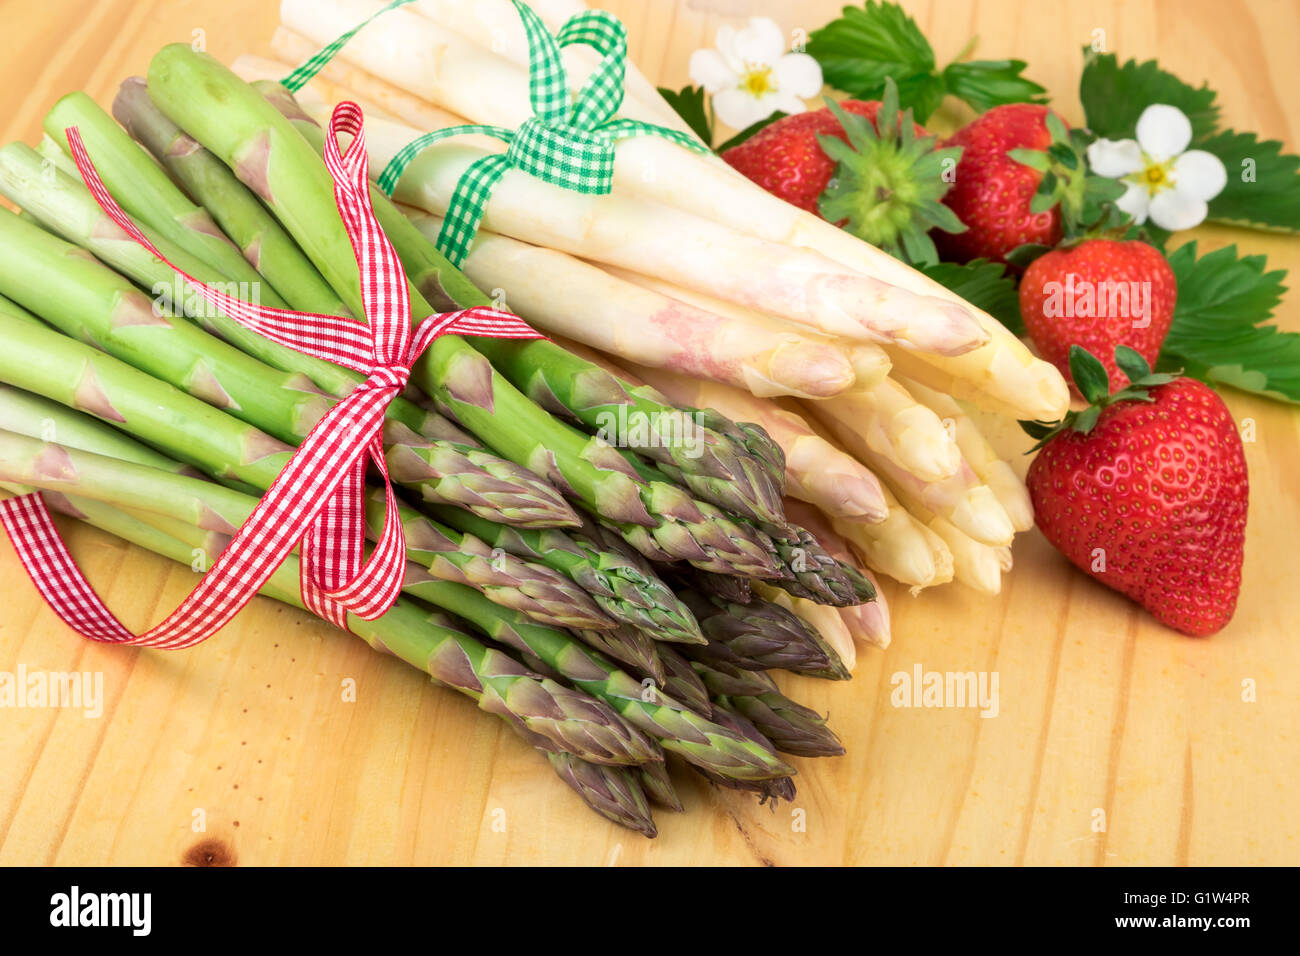 Fresh asparagus with strawberries on wood. Vegan food, vegetarian and healthy cooking concept. Stock Photo